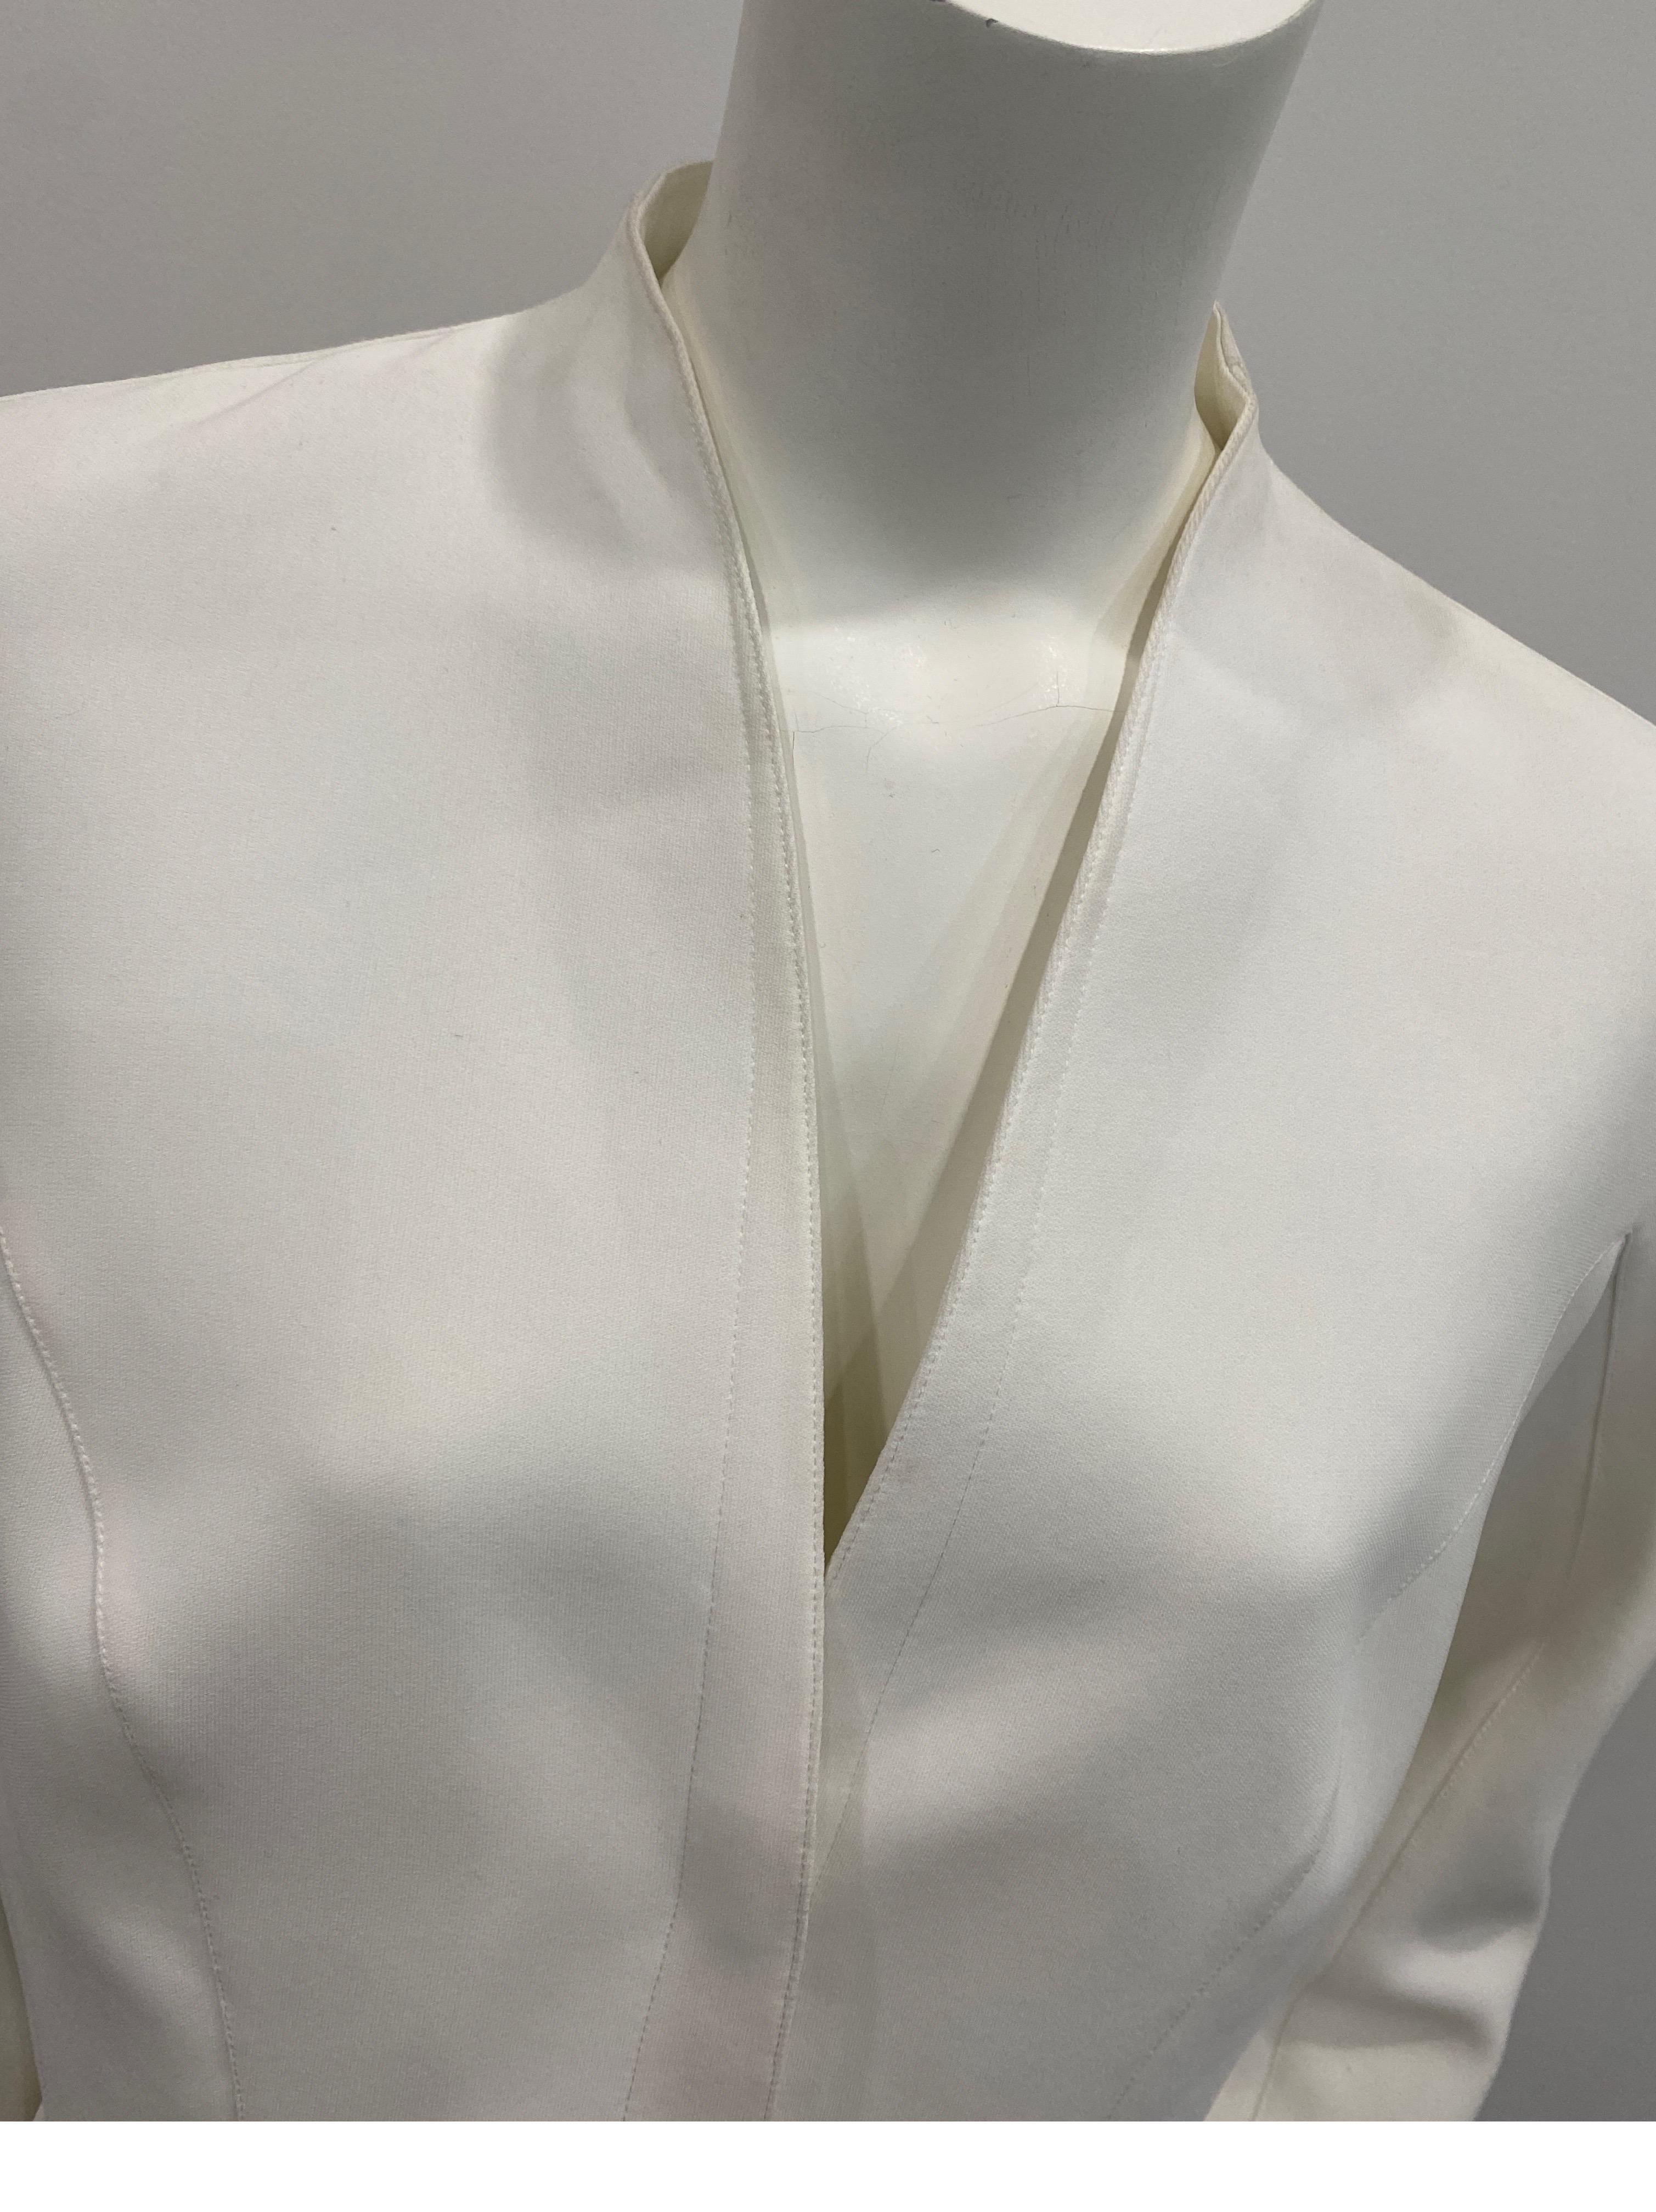 Thierry Mugler Couture 1990s White Jacket with Silver metallic details - Size 46 For Sale 7